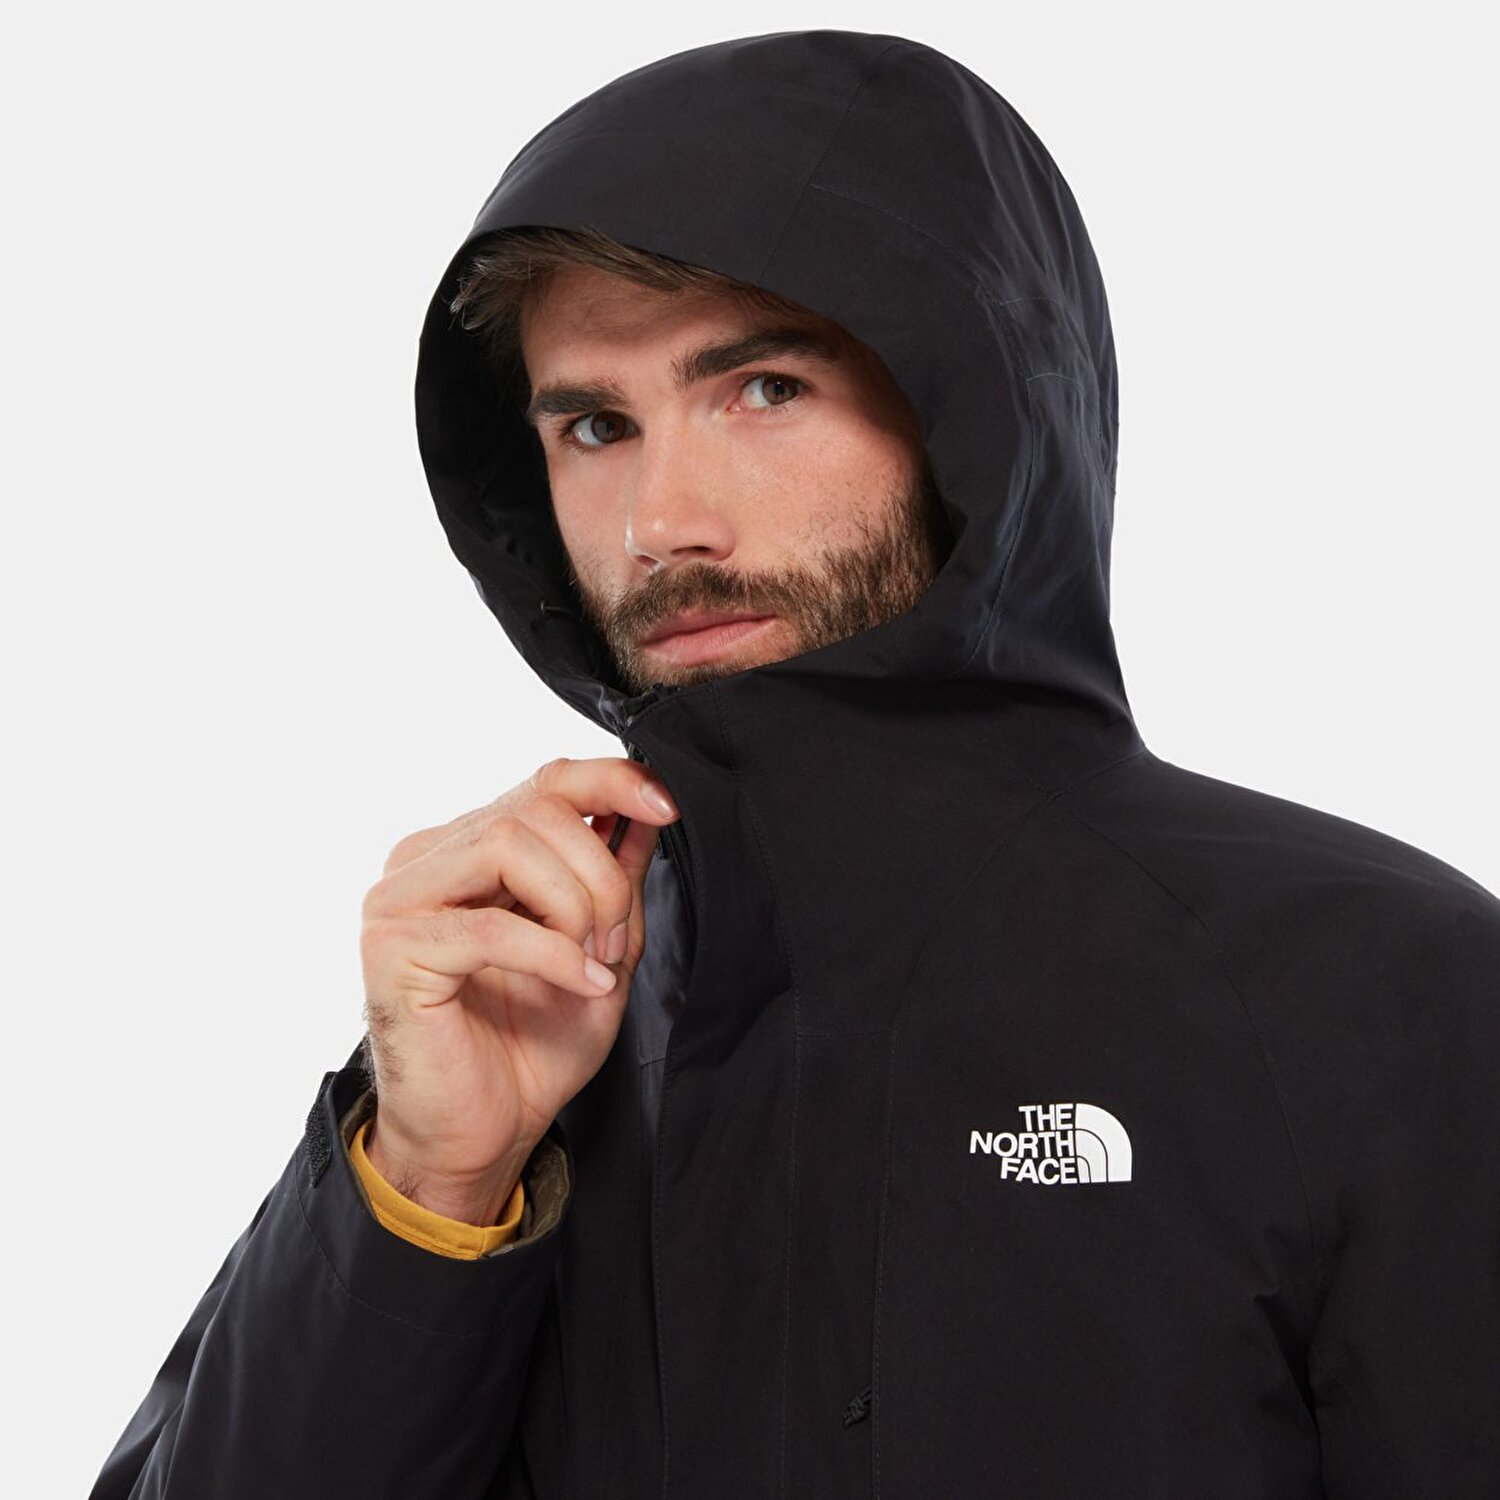 the north face t93826kx7